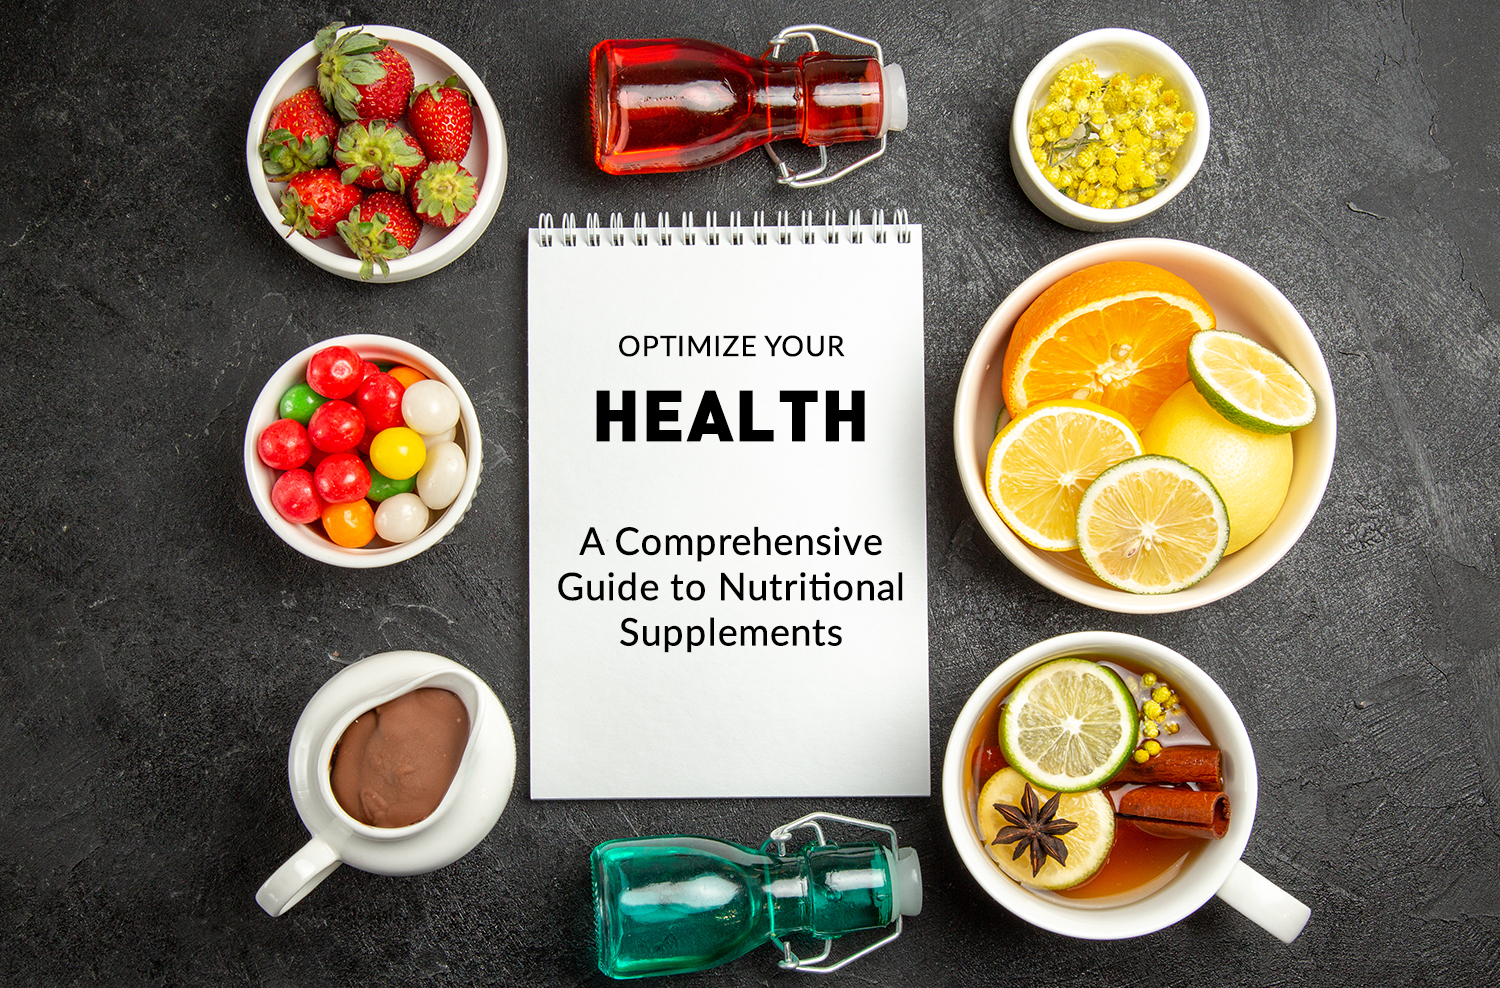 Optimize Your Health - A Comprehensive Guide to Nutritional Supplements